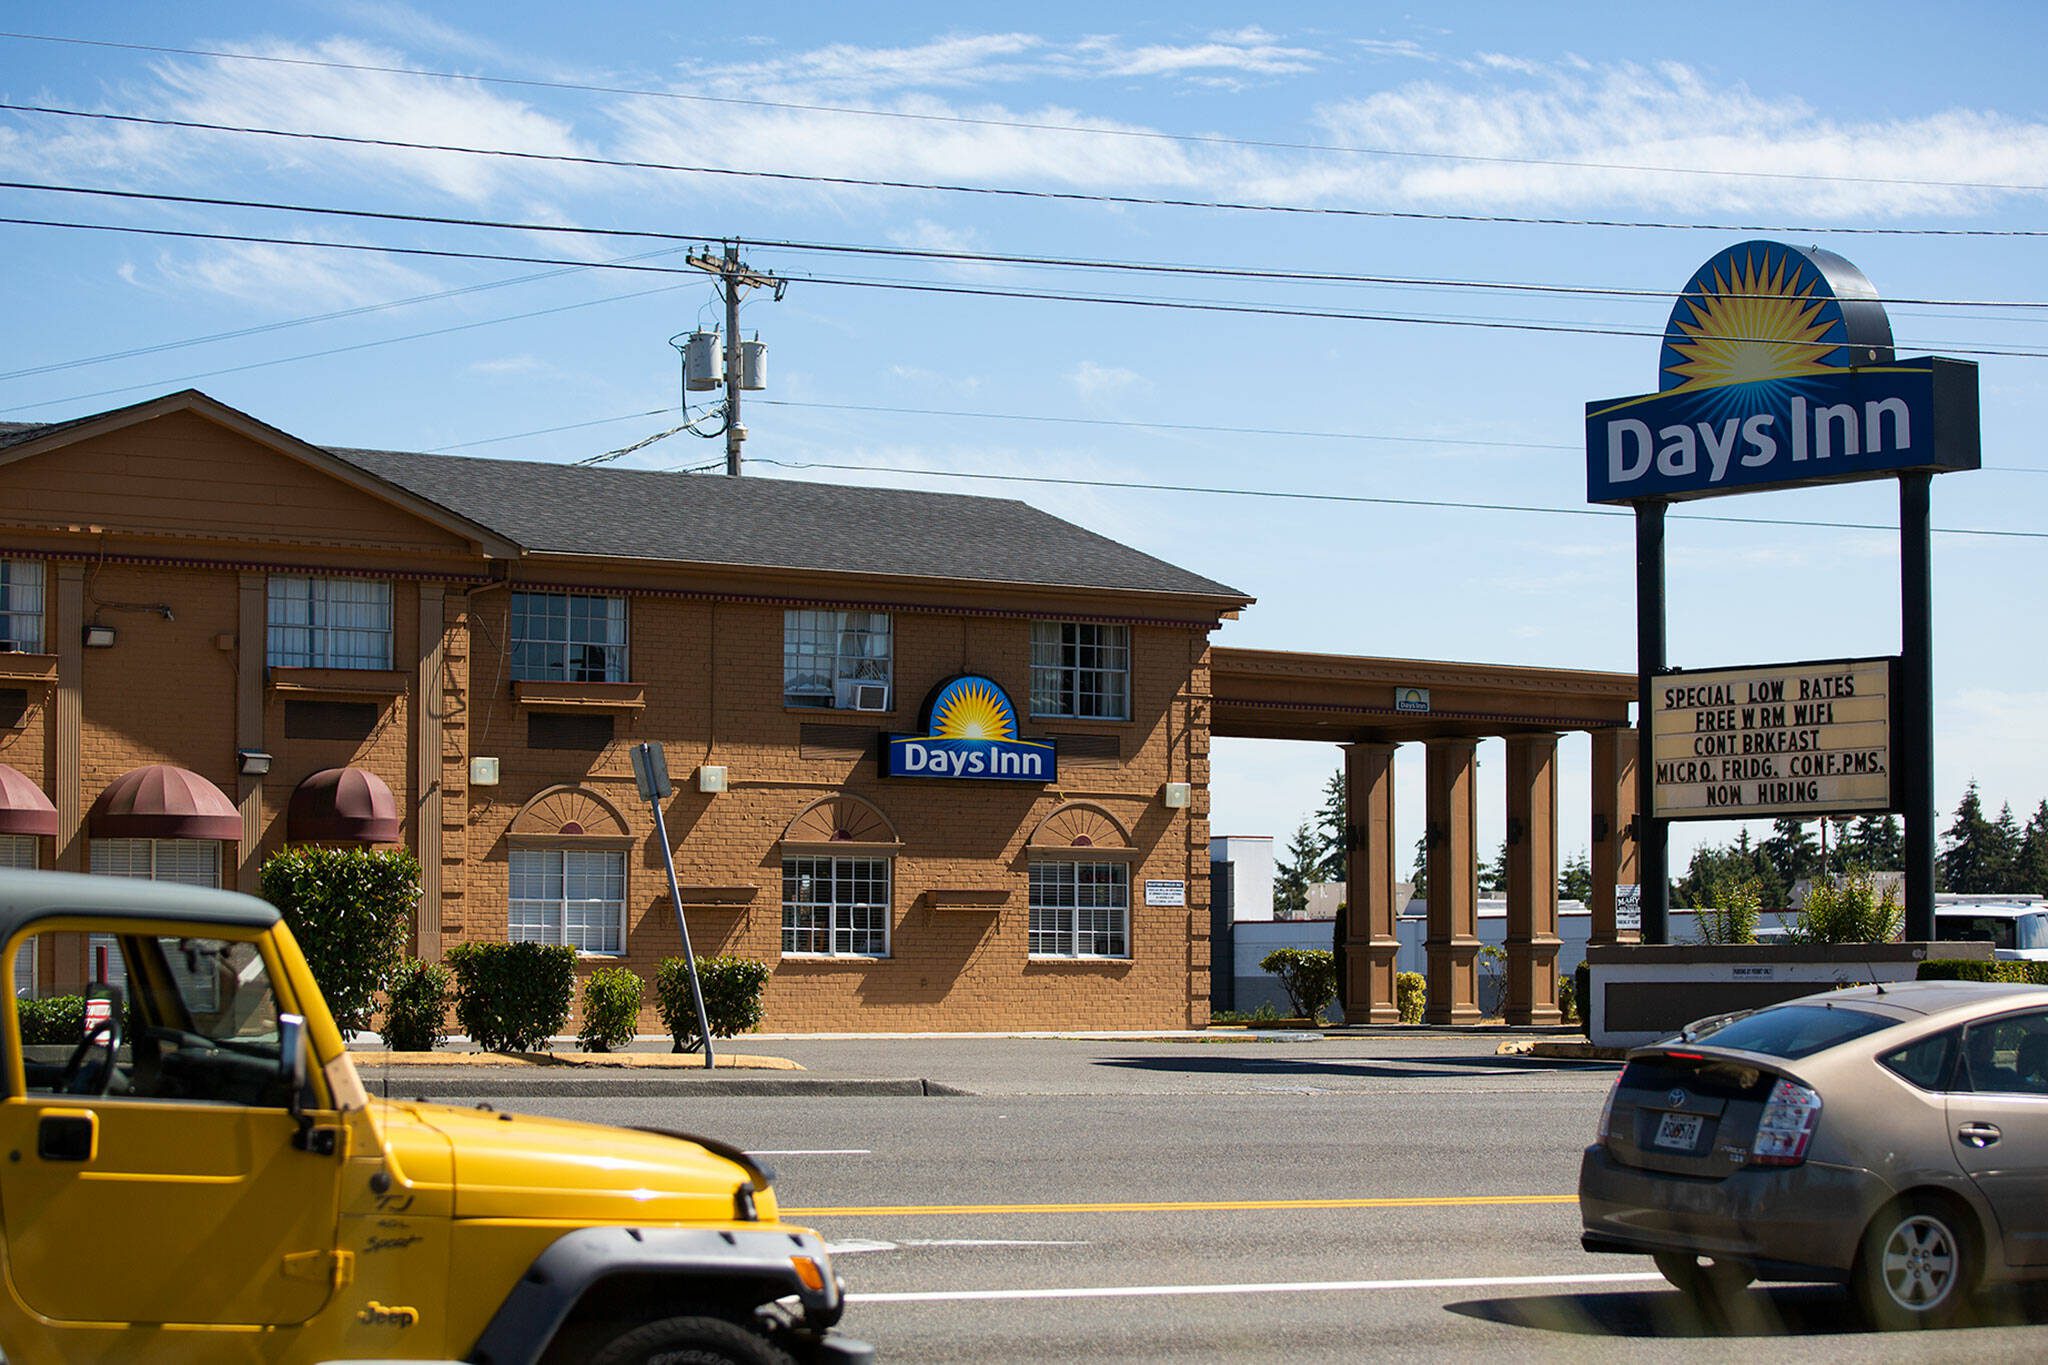 The Days Inn on Everett Mall Way, where The Hand Up Project was running a shelter program. Snohomish County purchased the hotel and plans to convert it into emergency housing. (Ryan Berry / The Herald) 
The Days Inn on Everett Mall Way, which Snohomish County is set to purchase and convert into emergency housing, is seen Monday, Aug. 8, 2022, in Everett, Washington. (Ryan Berry / The Herald)